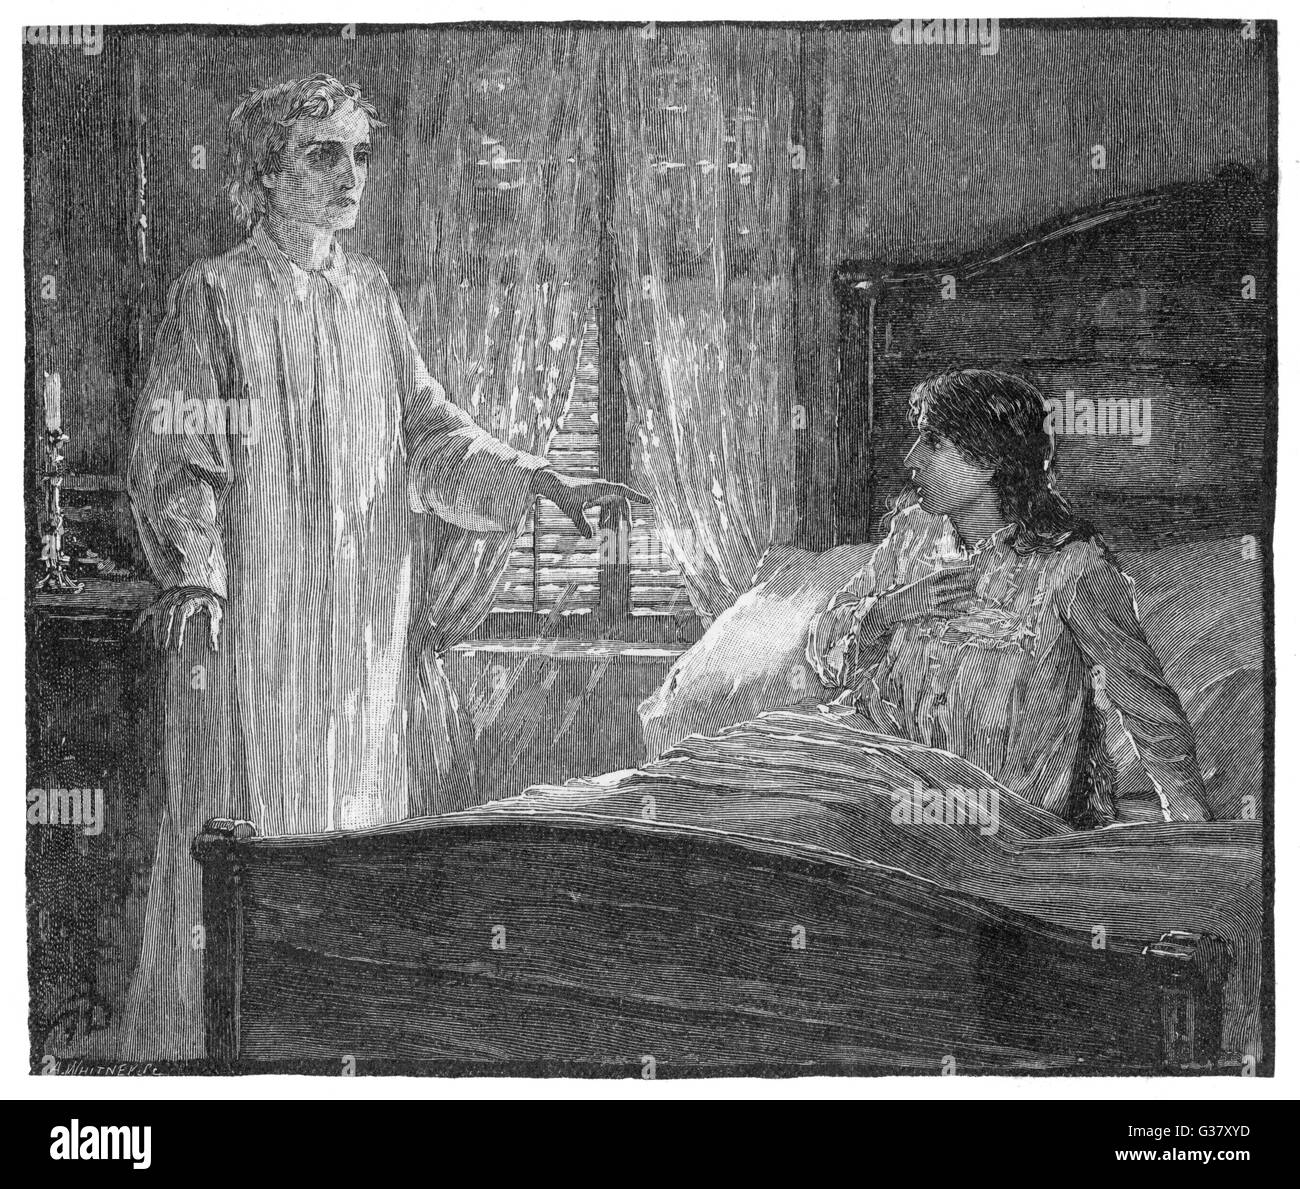 A mysterious apparition at her bedside awakens and alarms a sleeping lady.     Date: 1883 Stock Photo